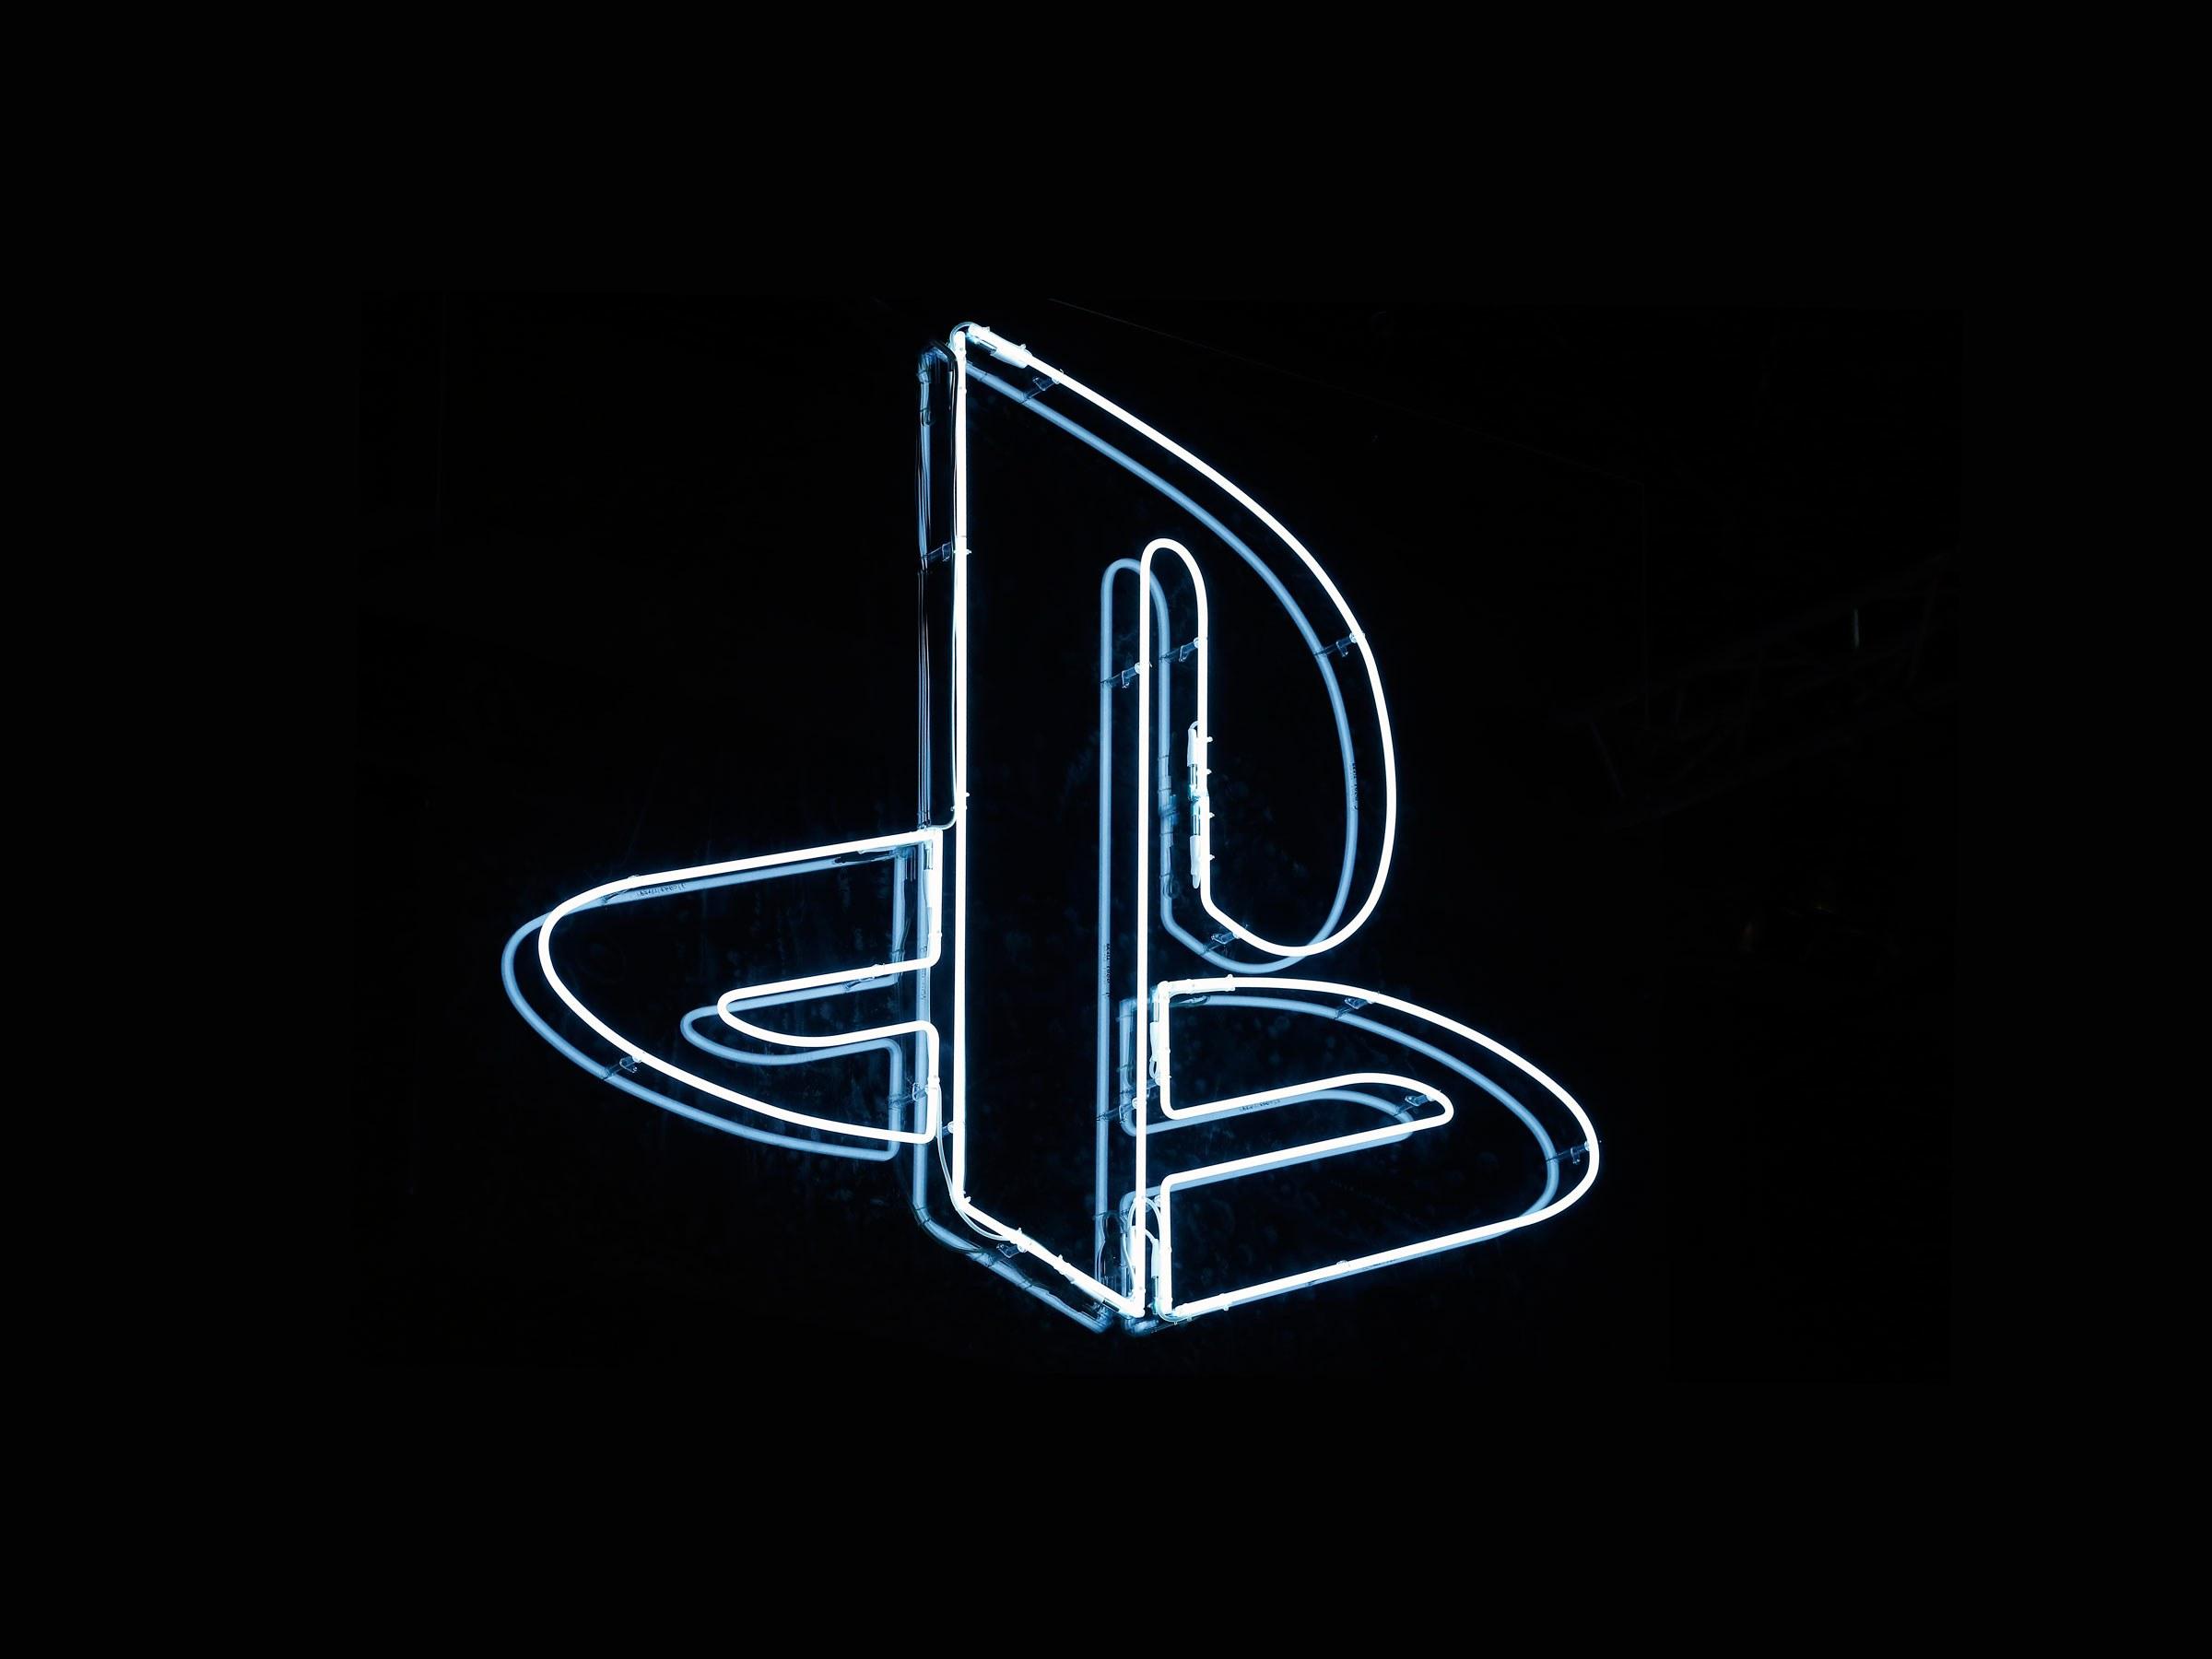 Exclusive: What To Expect From Sony's Next Gen PlayStation